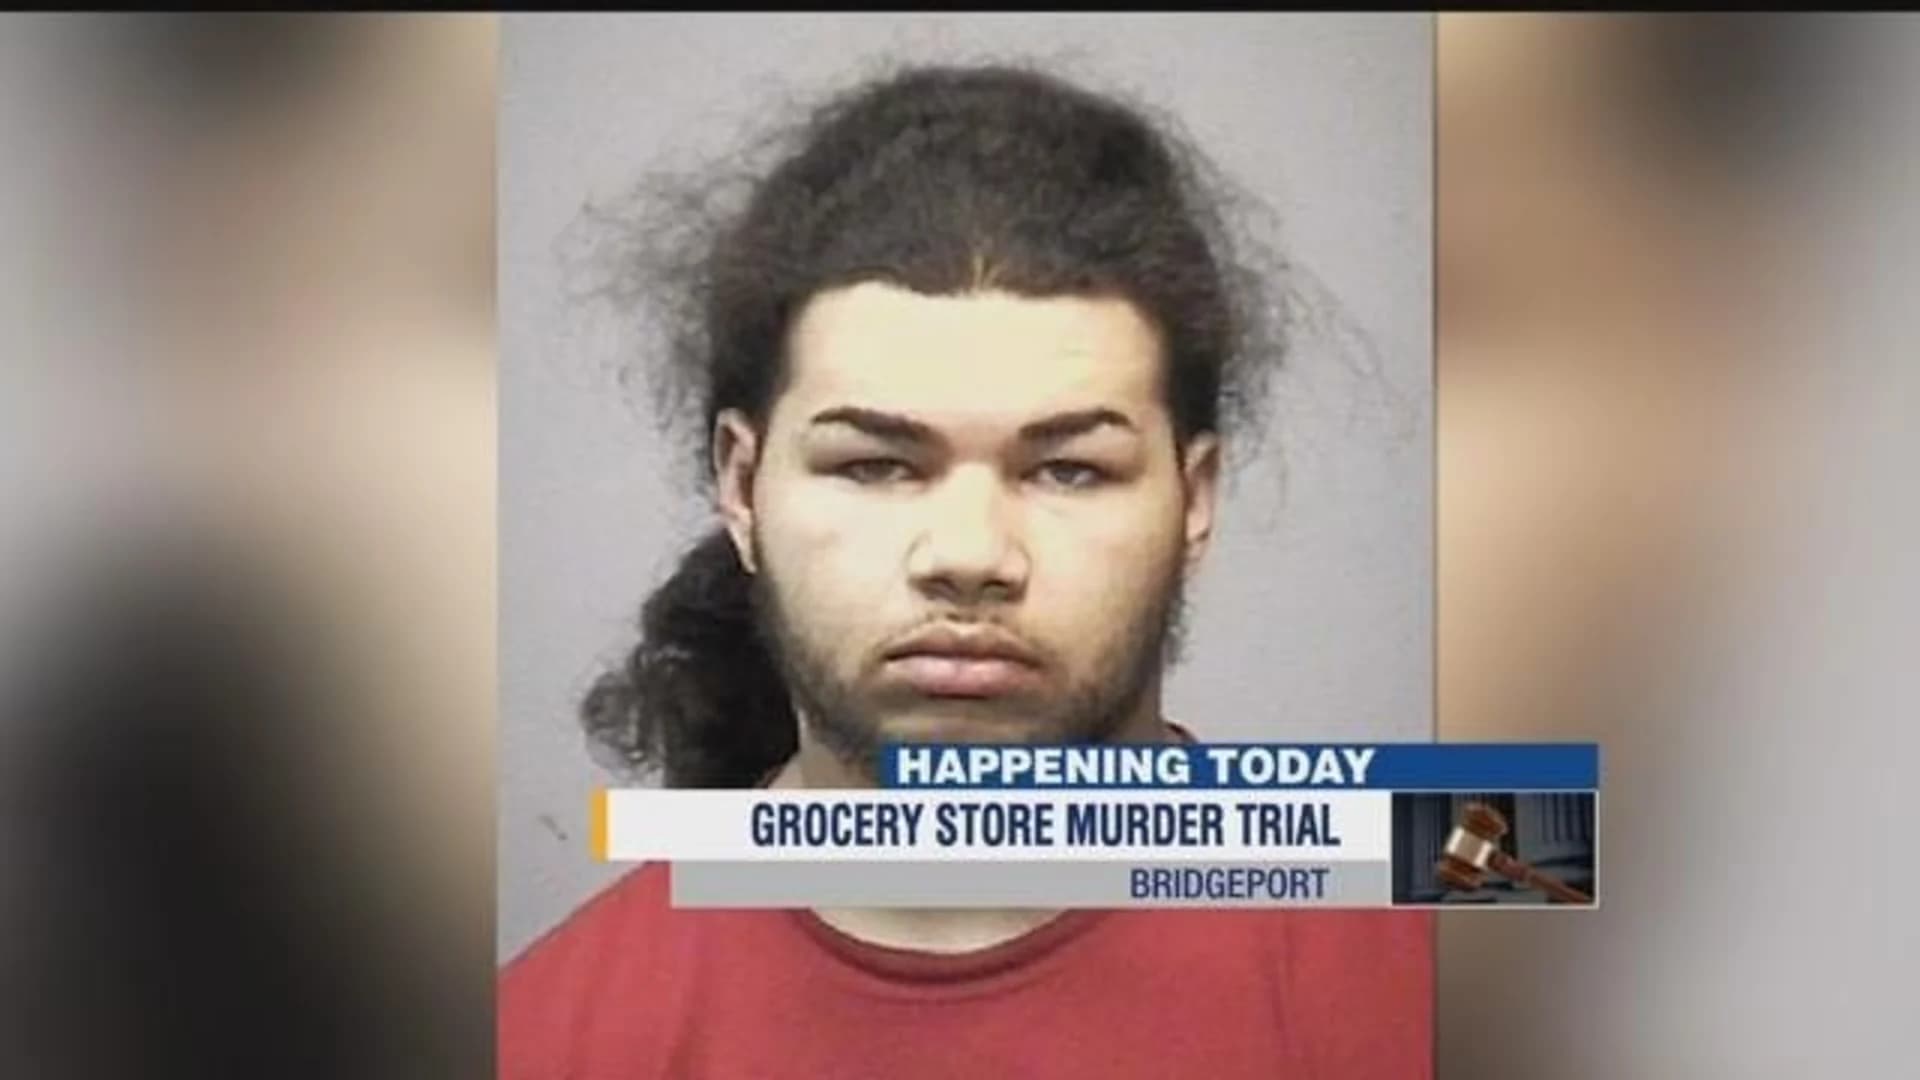 Trial begins for West Haven suspect in grocery store murder